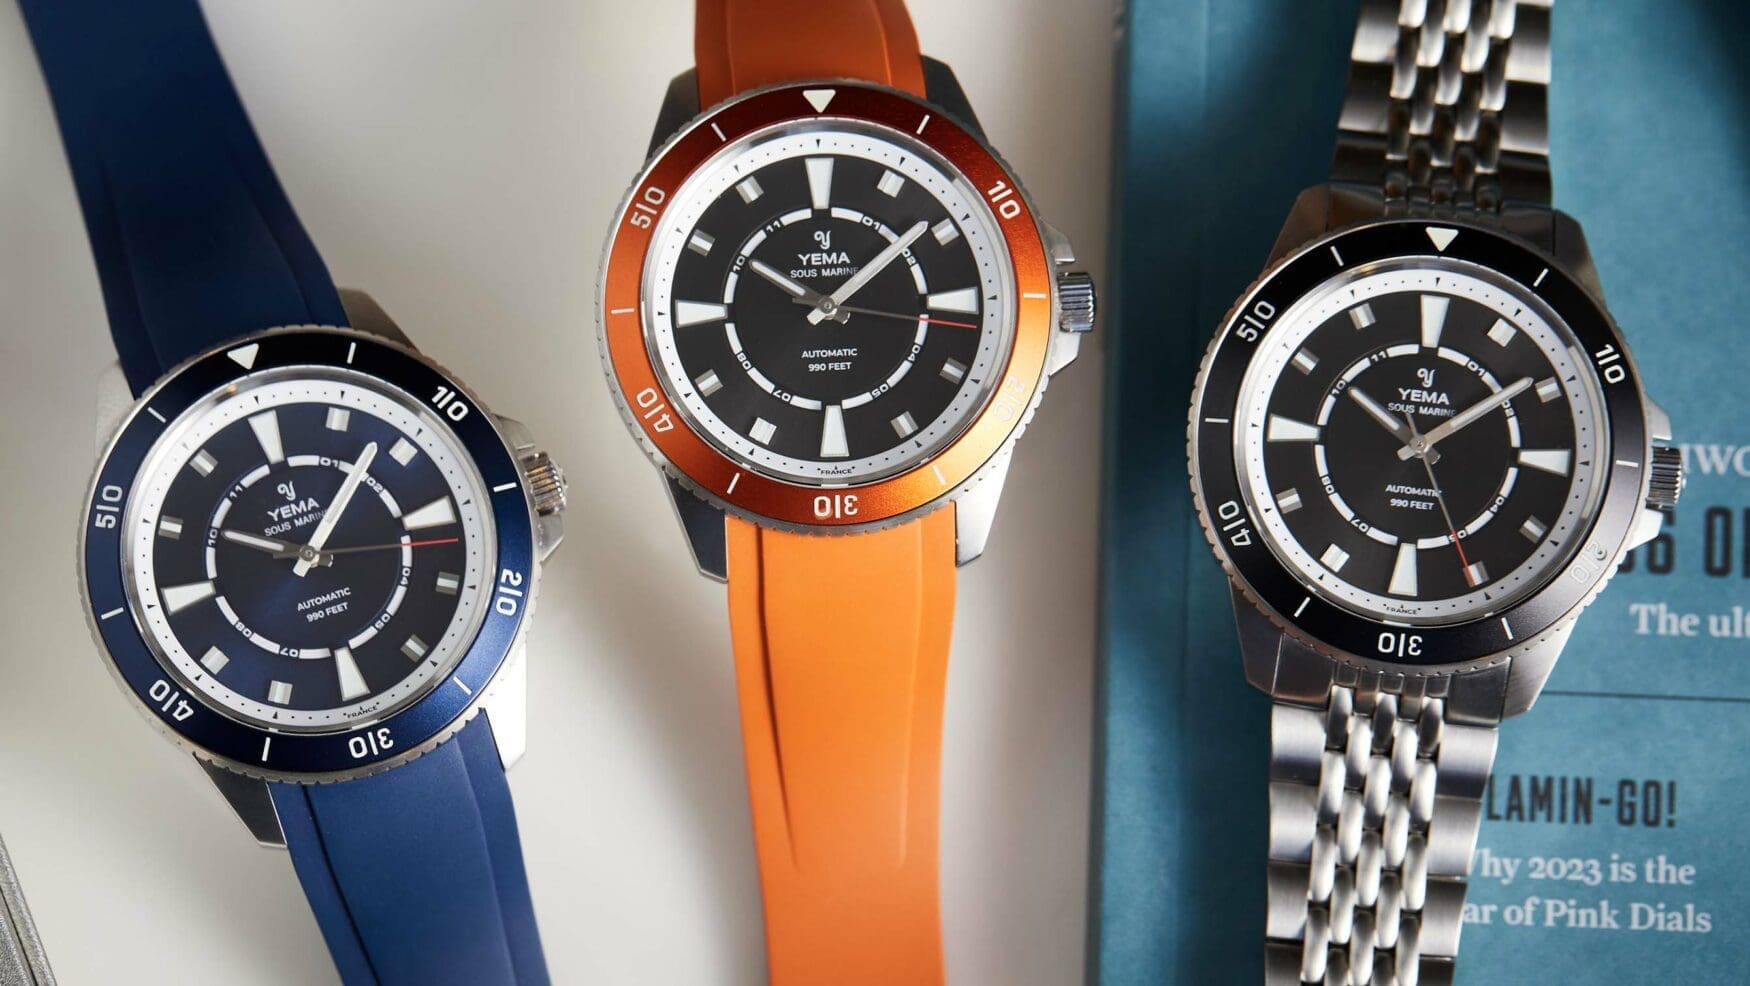 The Yema Sous Marine is a modern dive watch from a mostly retro-inspired brand